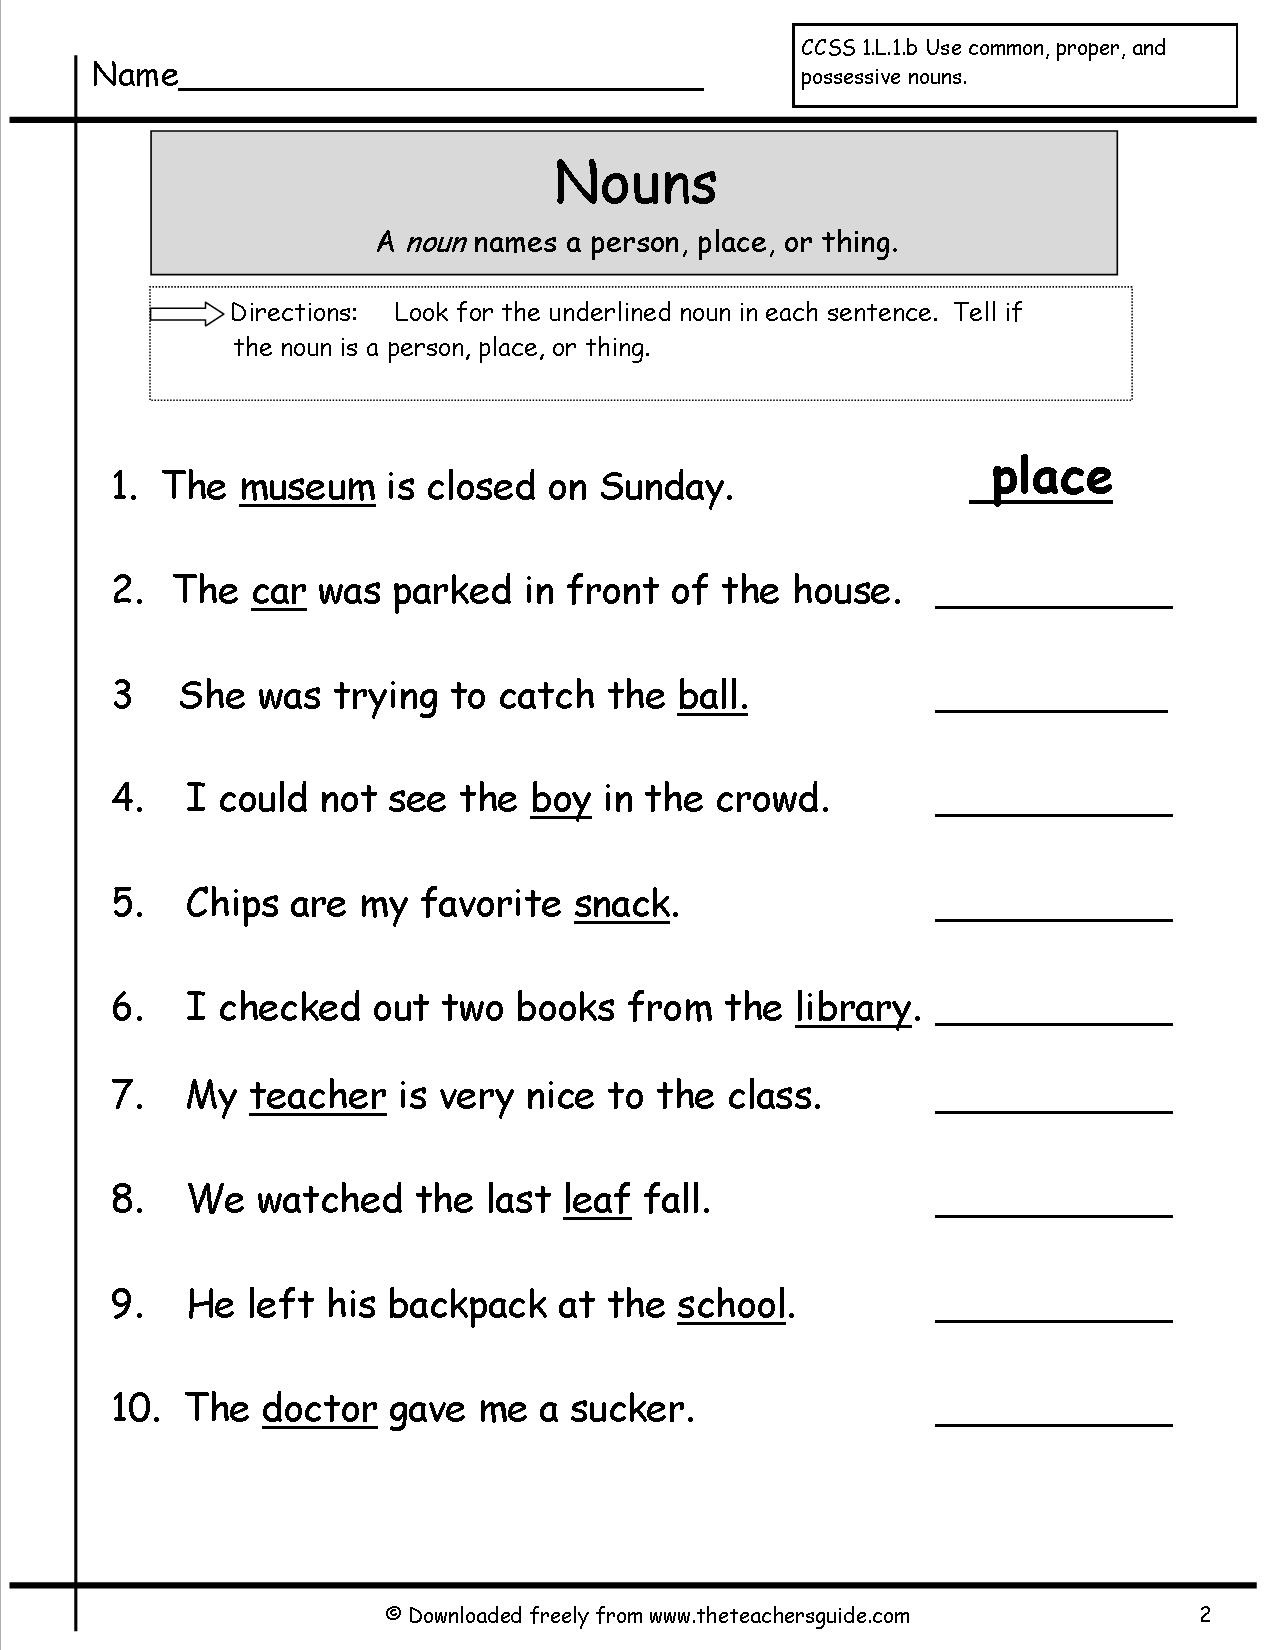 Nouns Worksheets From The Teacher s Guide Free Noun Printables Free Printable